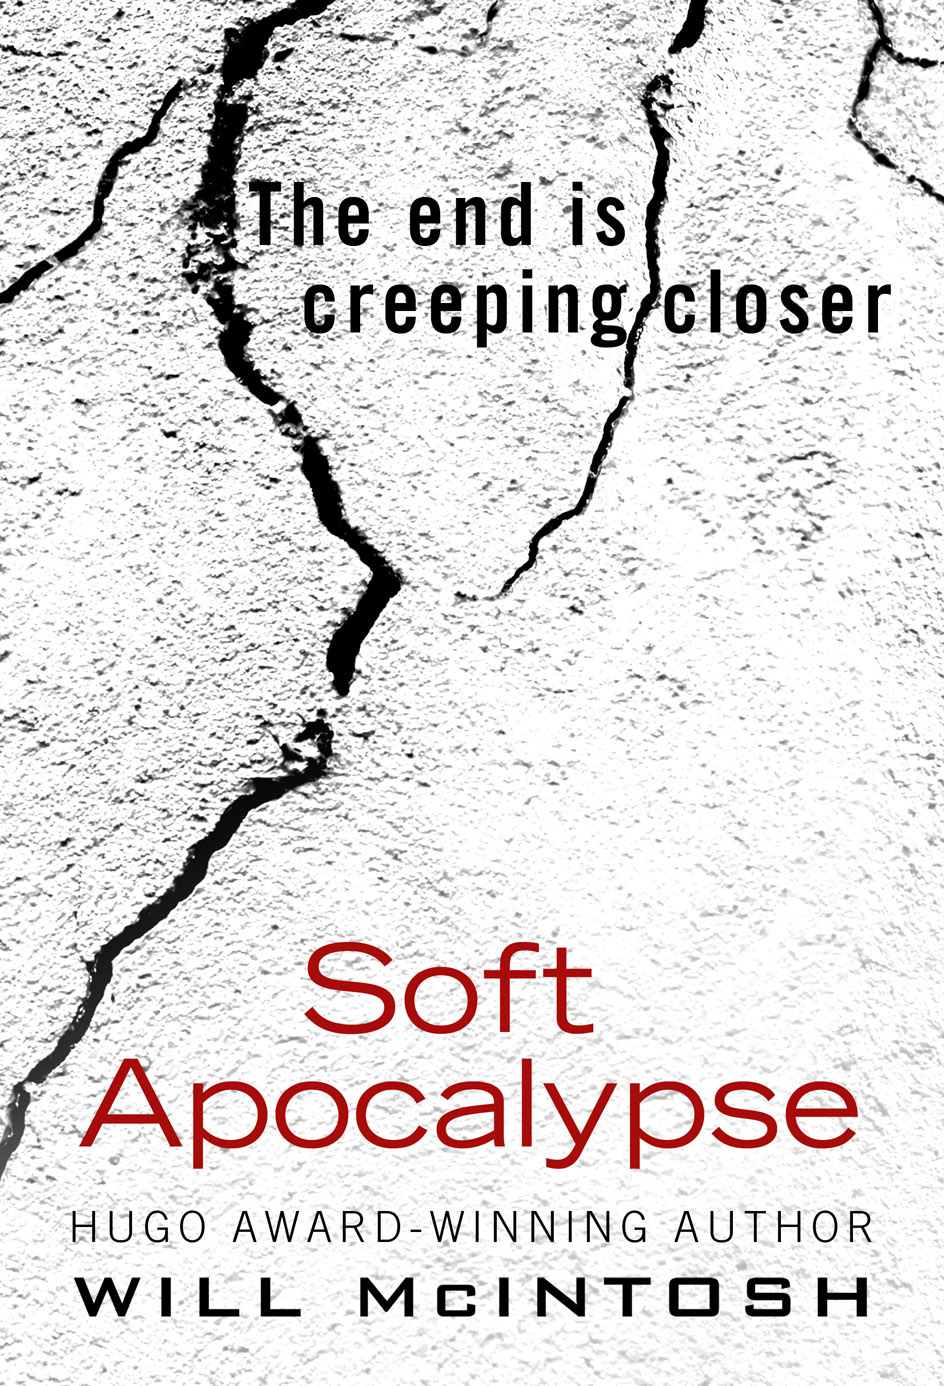 Soft Apocalypse, a debut science fiction novel from the Hugo Award-winning author Will McIntosh